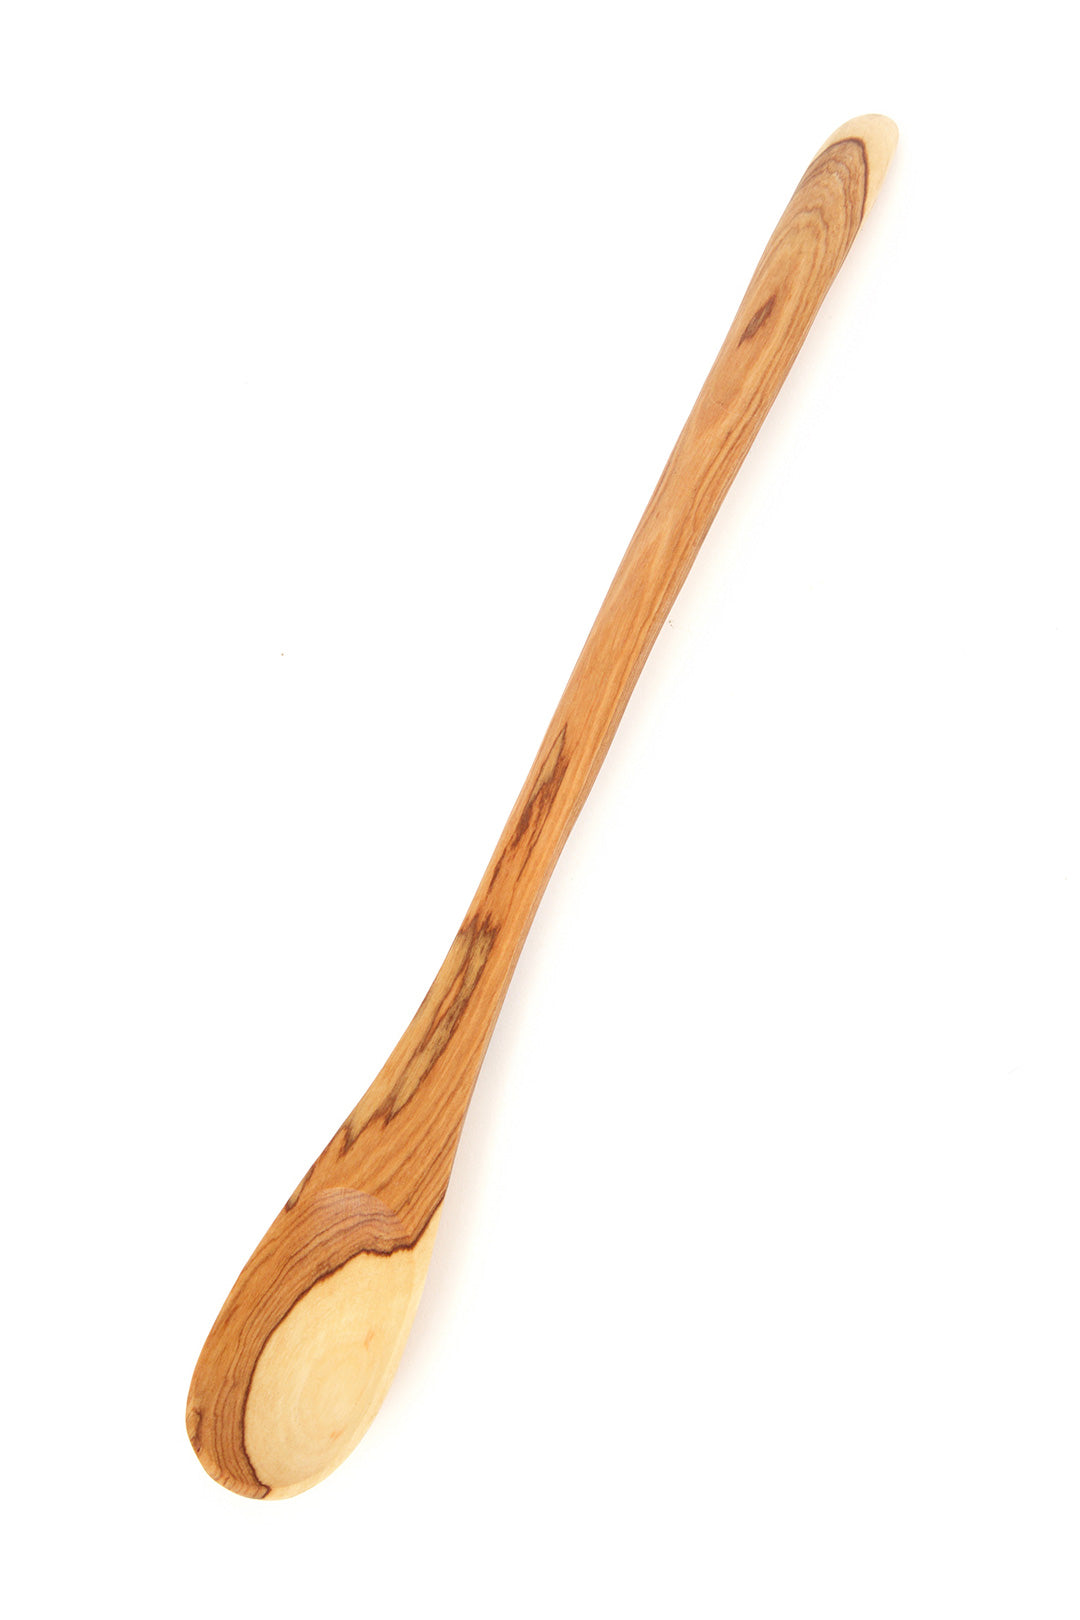 Stretched Wild Olive Wood Stirring Spoon Stretched Wild Olive Wood Stirring Spoon